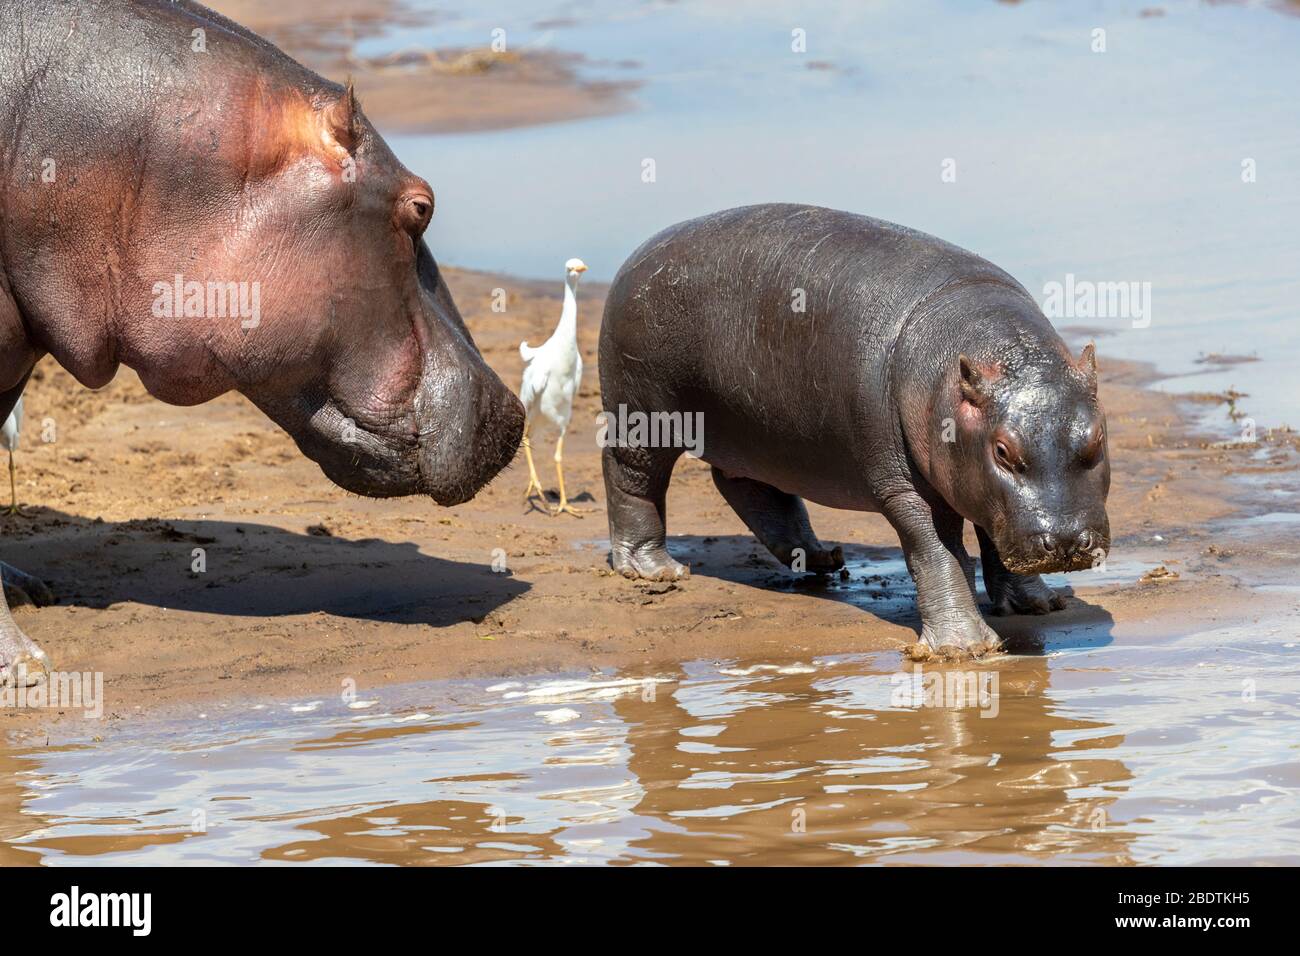 a hippopotamus and its little walk on the banks of a river Stock Photo